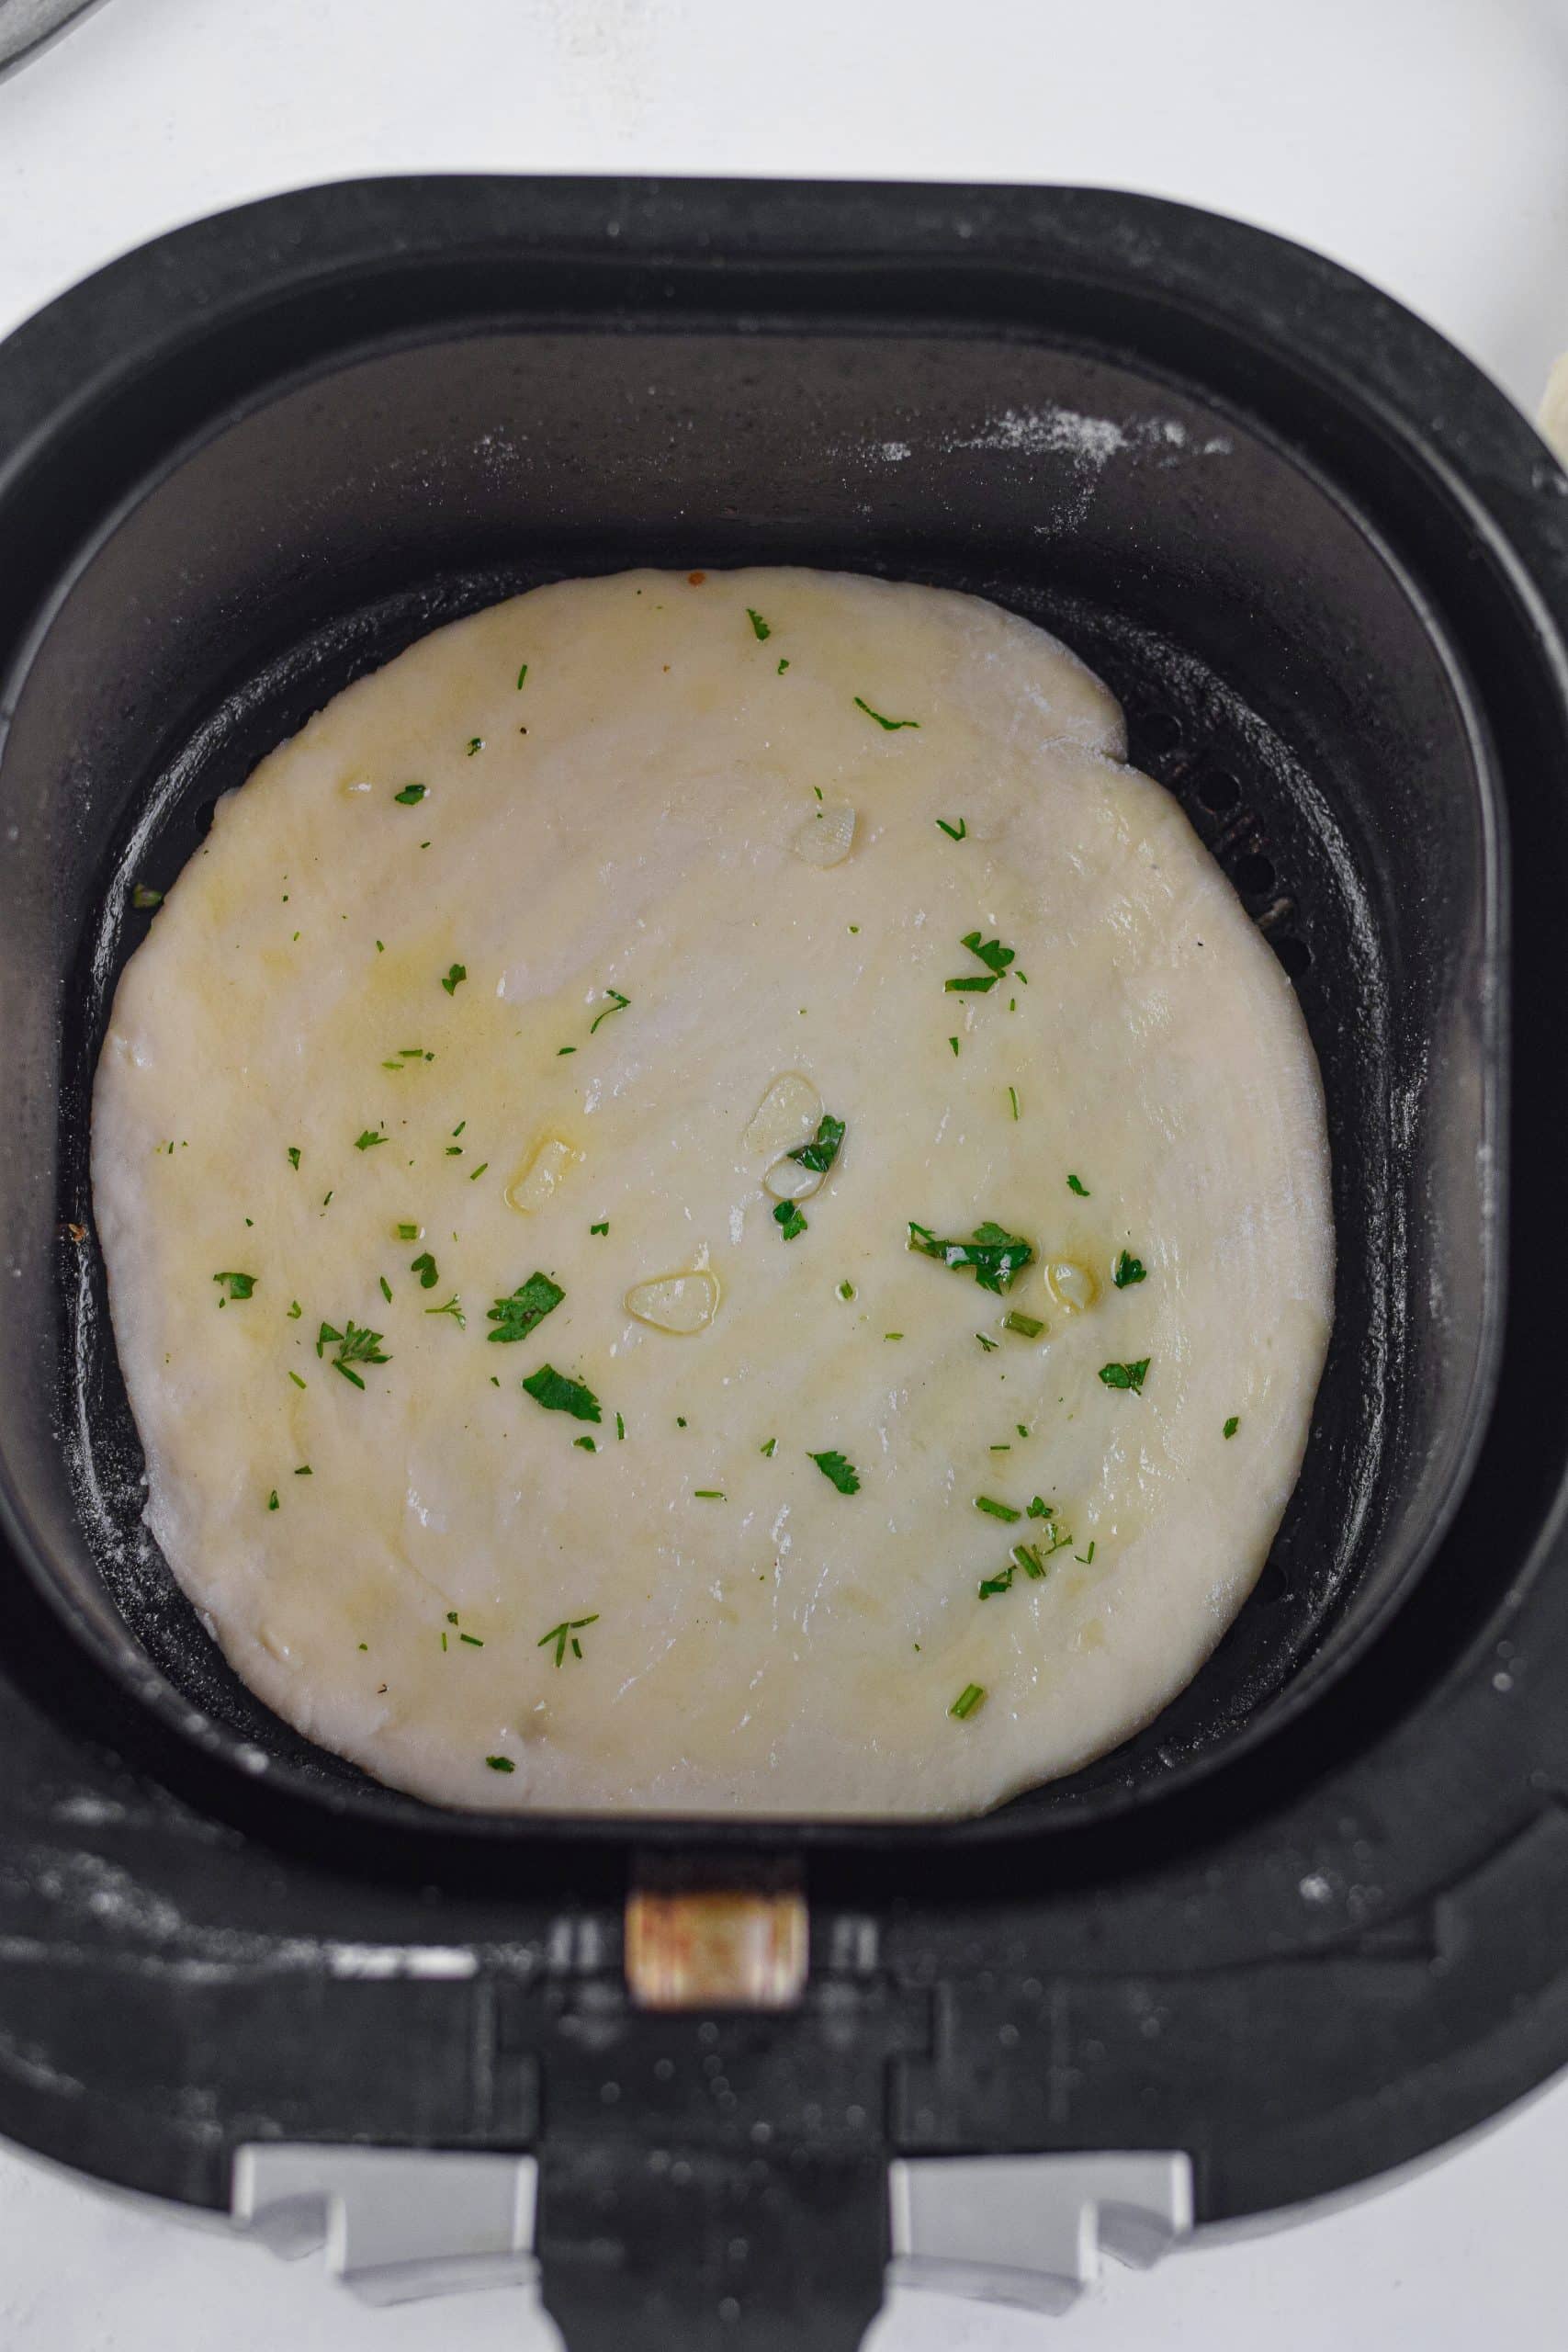 garlic buttered naan bread in the basket of an air fryer